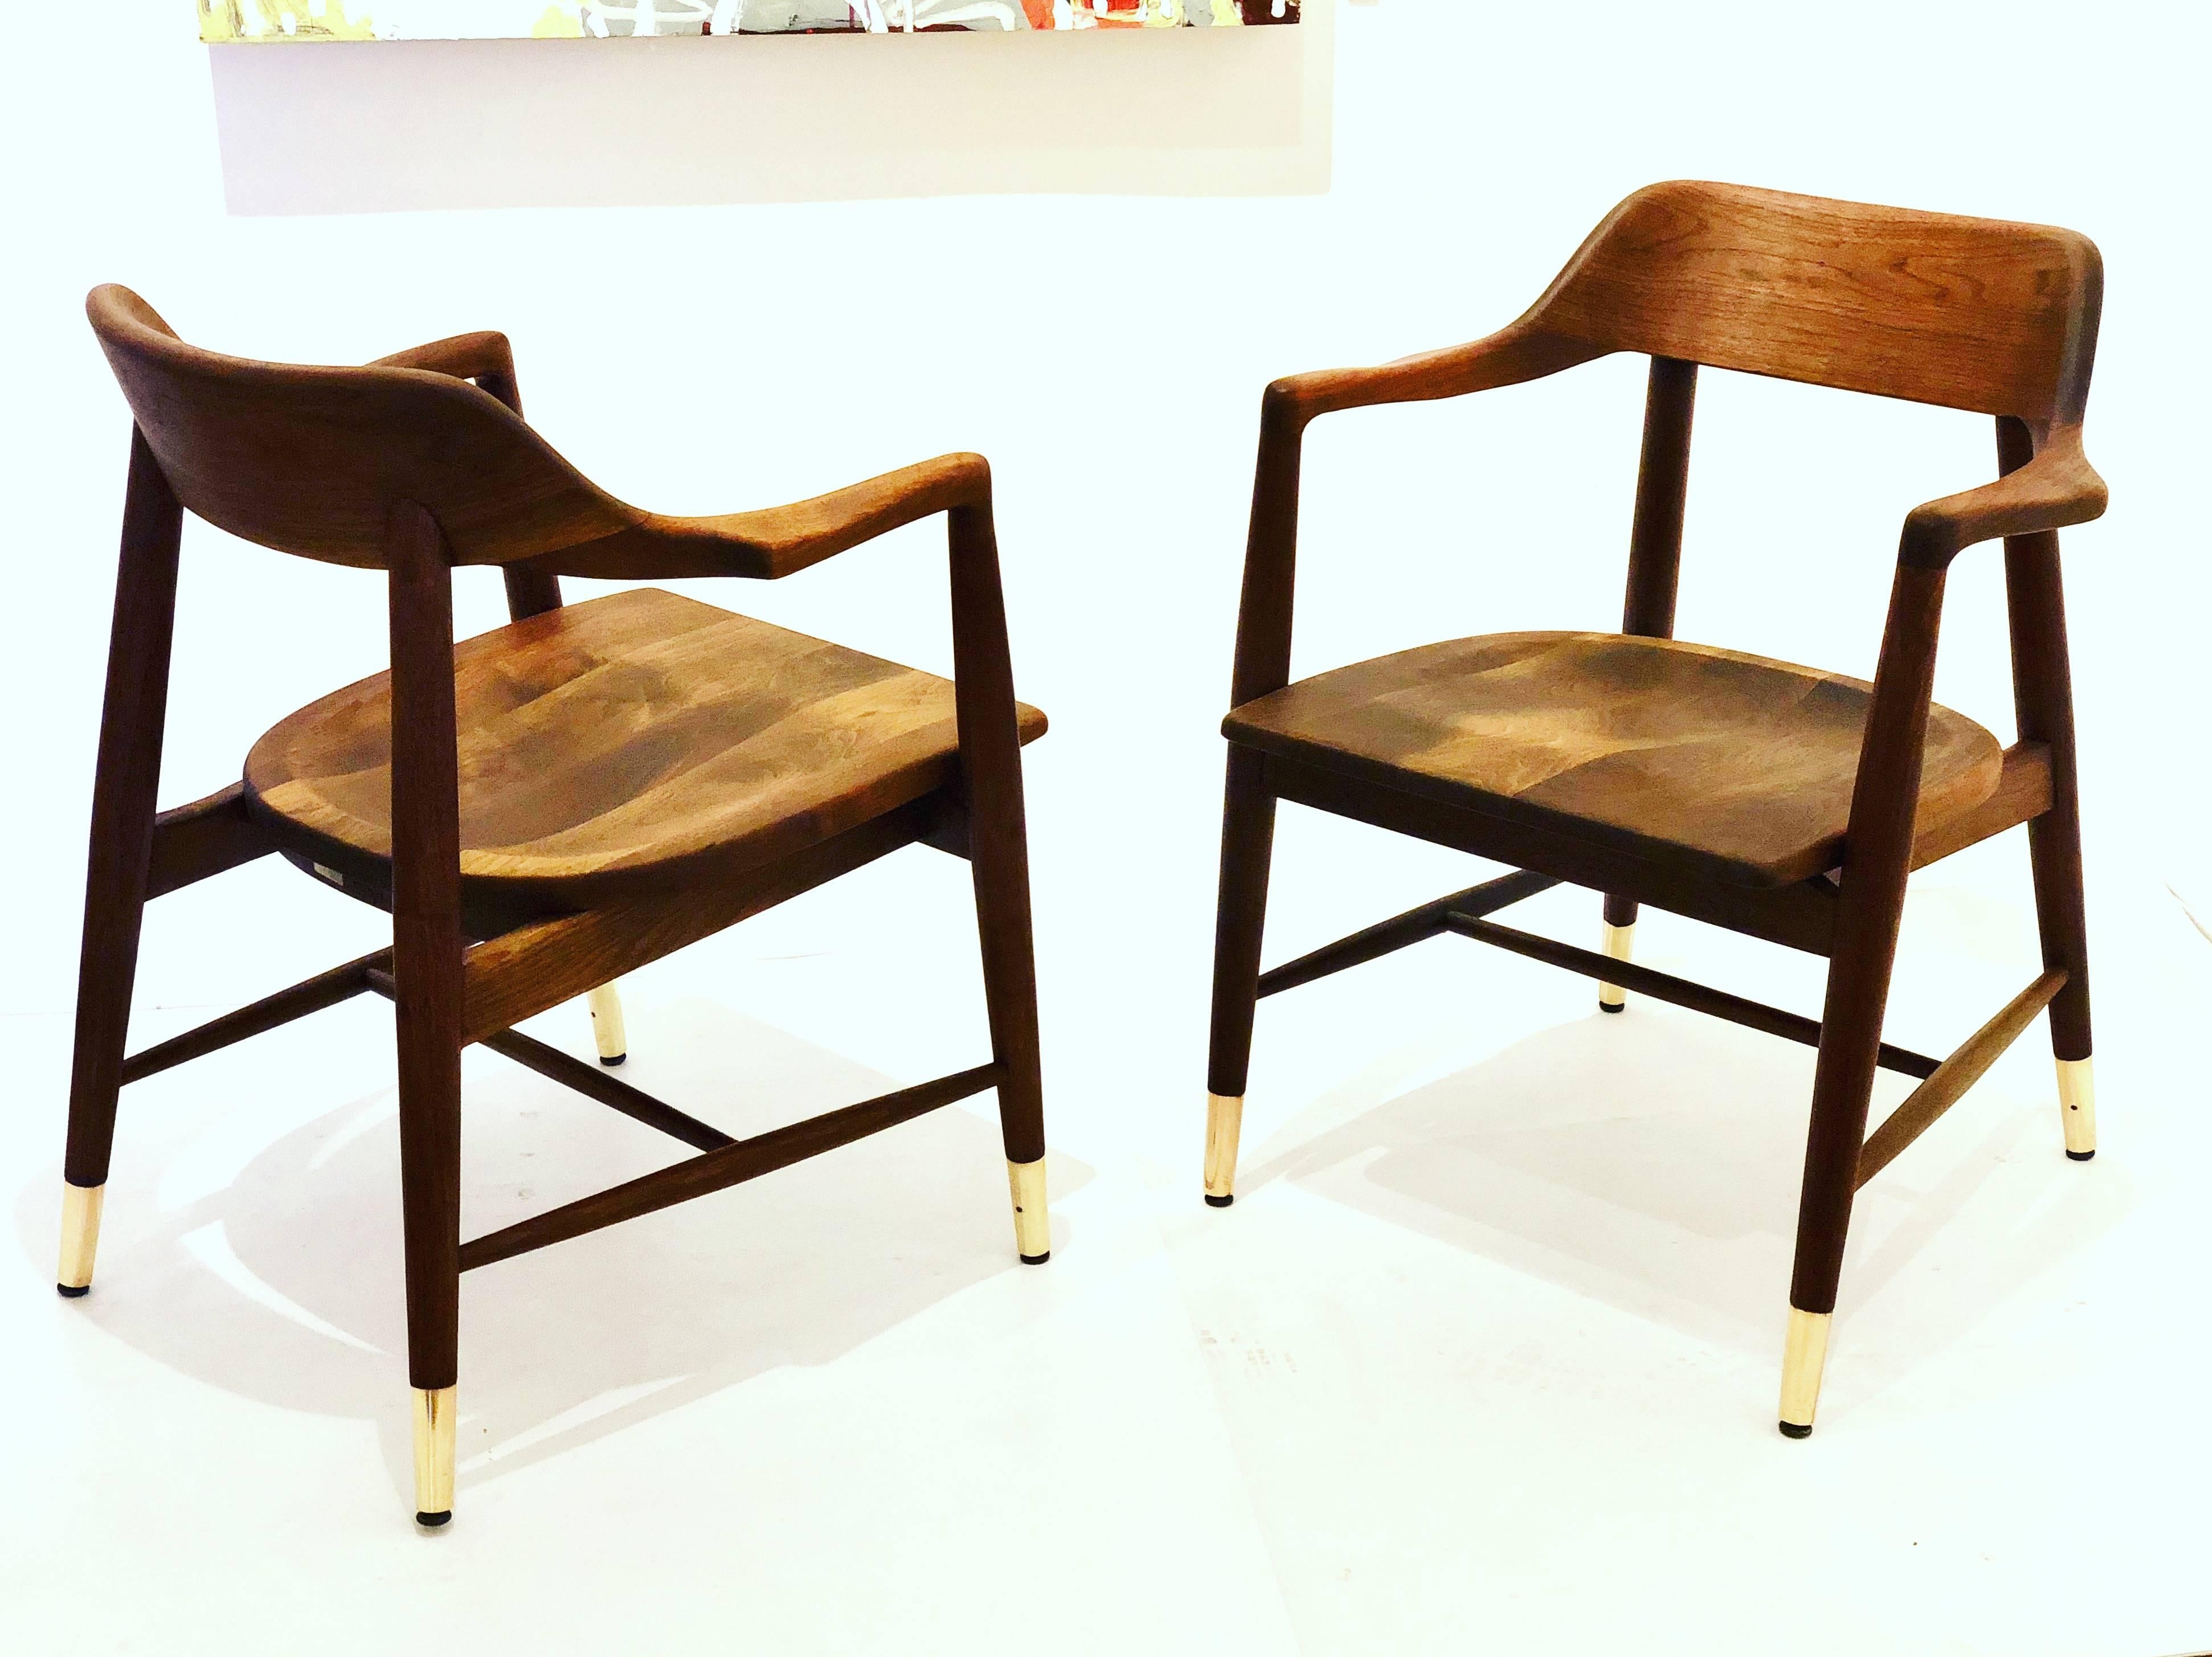 Incredible quality and craftsmanship on this pair of solid American black walnut, armchairs by Marble furniture solid and sturdy, freshly refinished and polished brass tips.